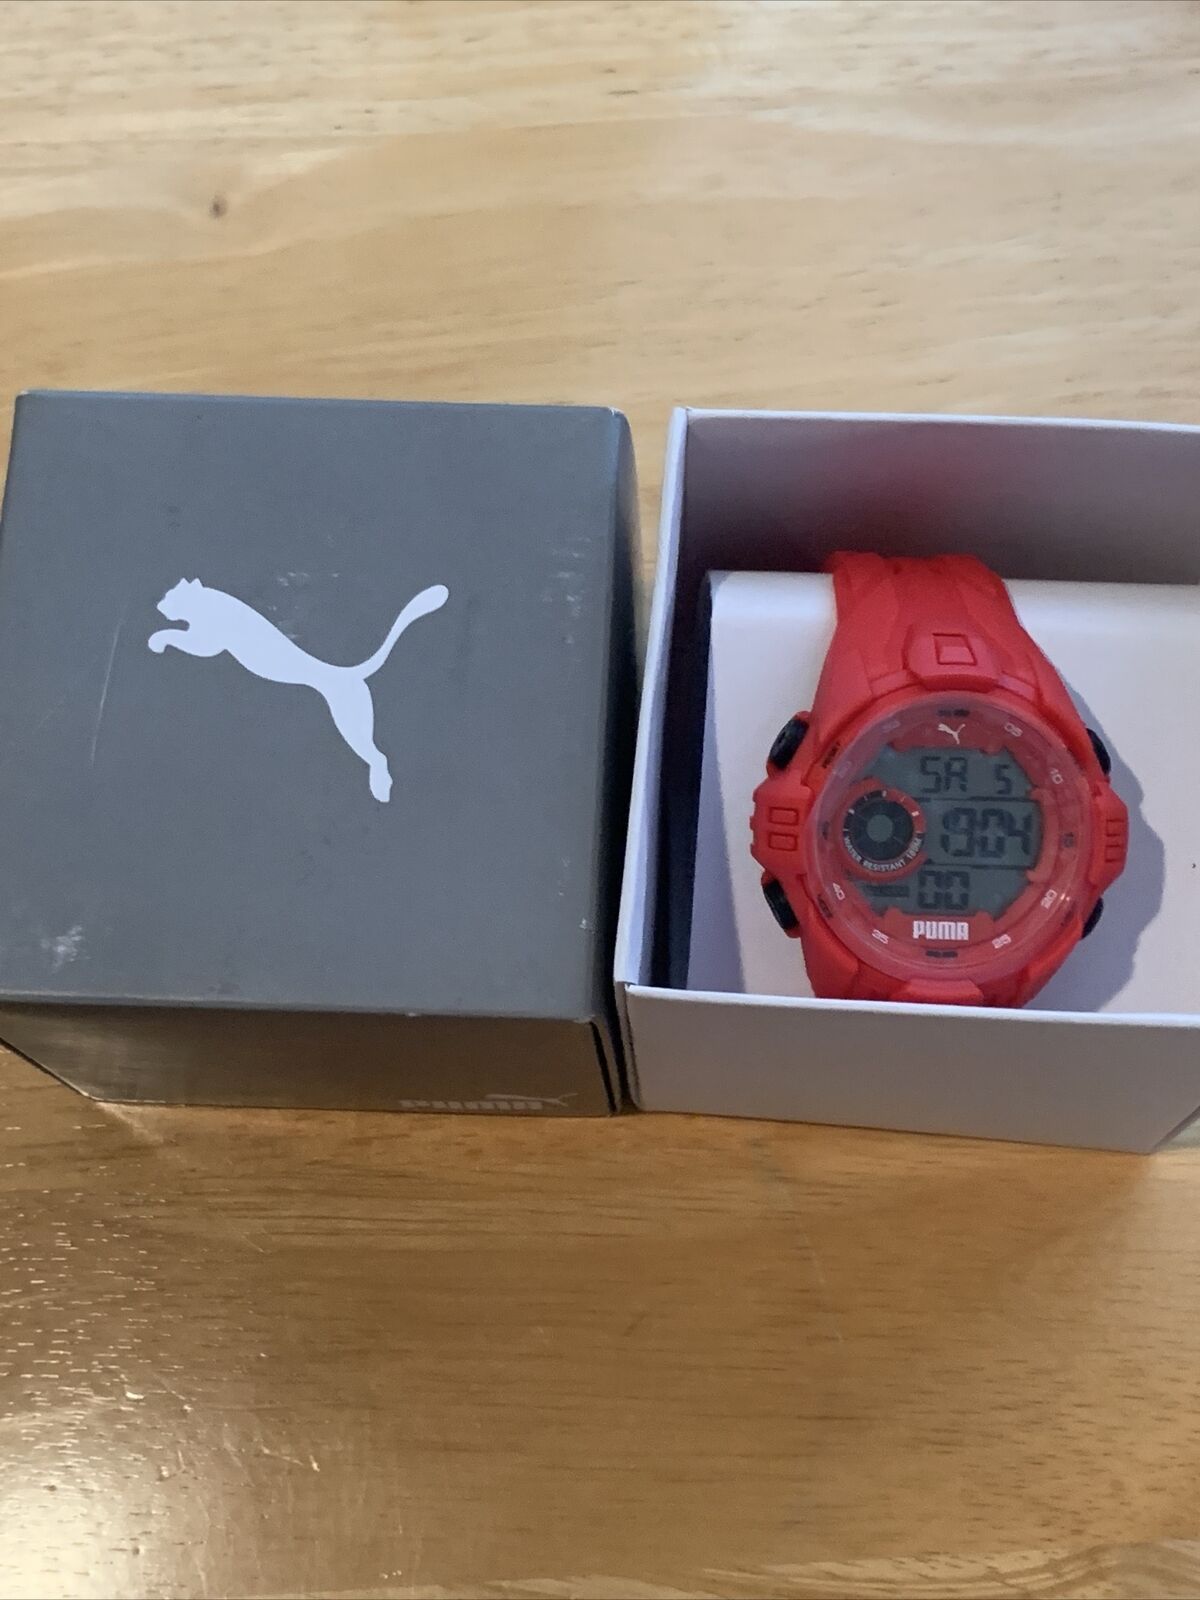 New Red Puma Sports Watch In Box With Tag